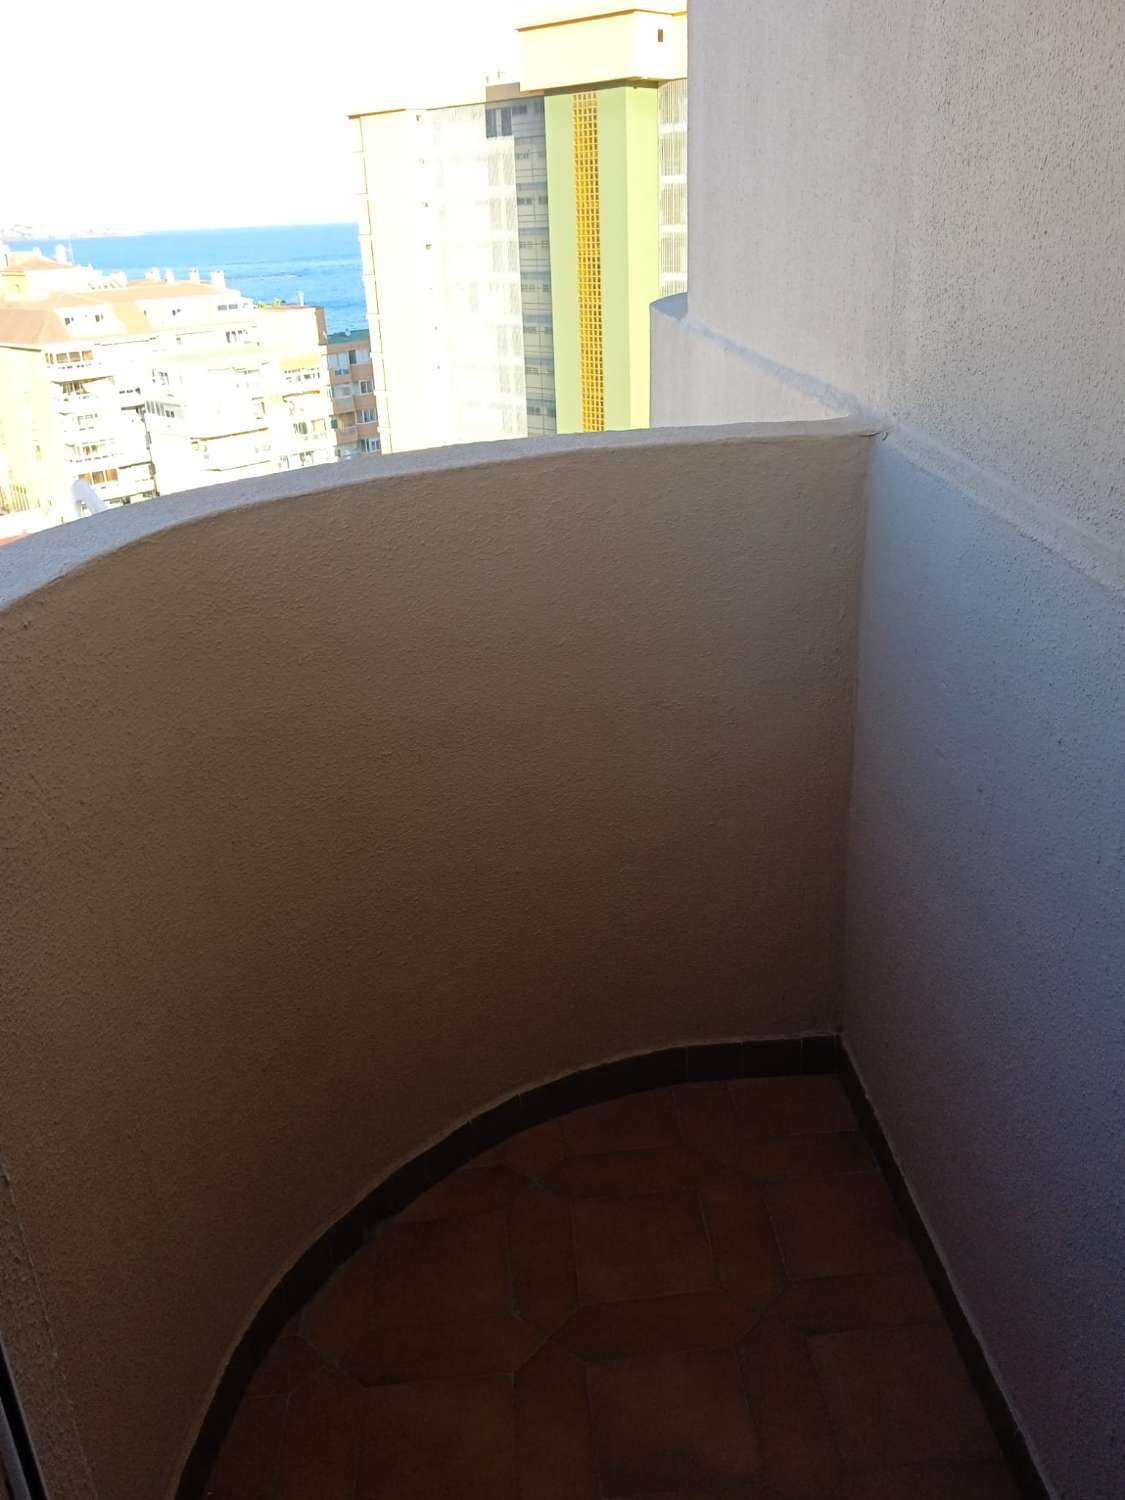 MID-SEASON. FOR RENT FROM 1.9.24-30-6-25 NICE APARTMENT WITH SEA VIEWS IN CARVAJAL AREA (FUENGIROLA)